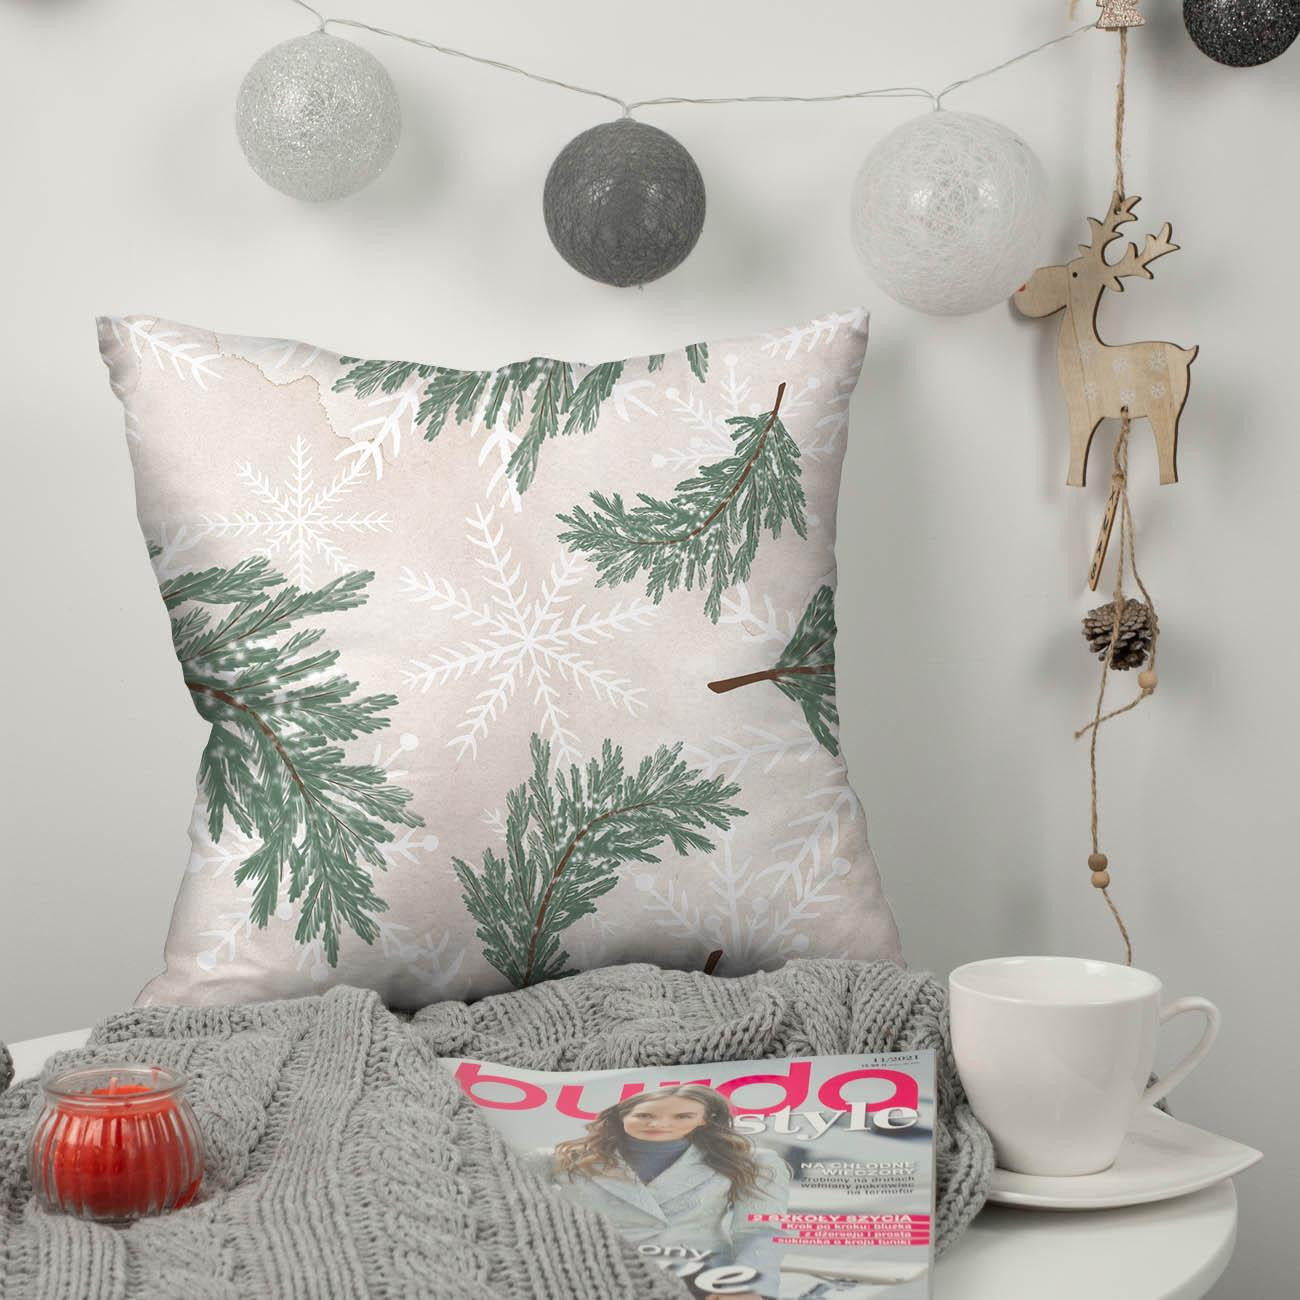 TWIGS AND SNOWFLAKES (WINTER IN THE CITY) - single jersey with elastane 